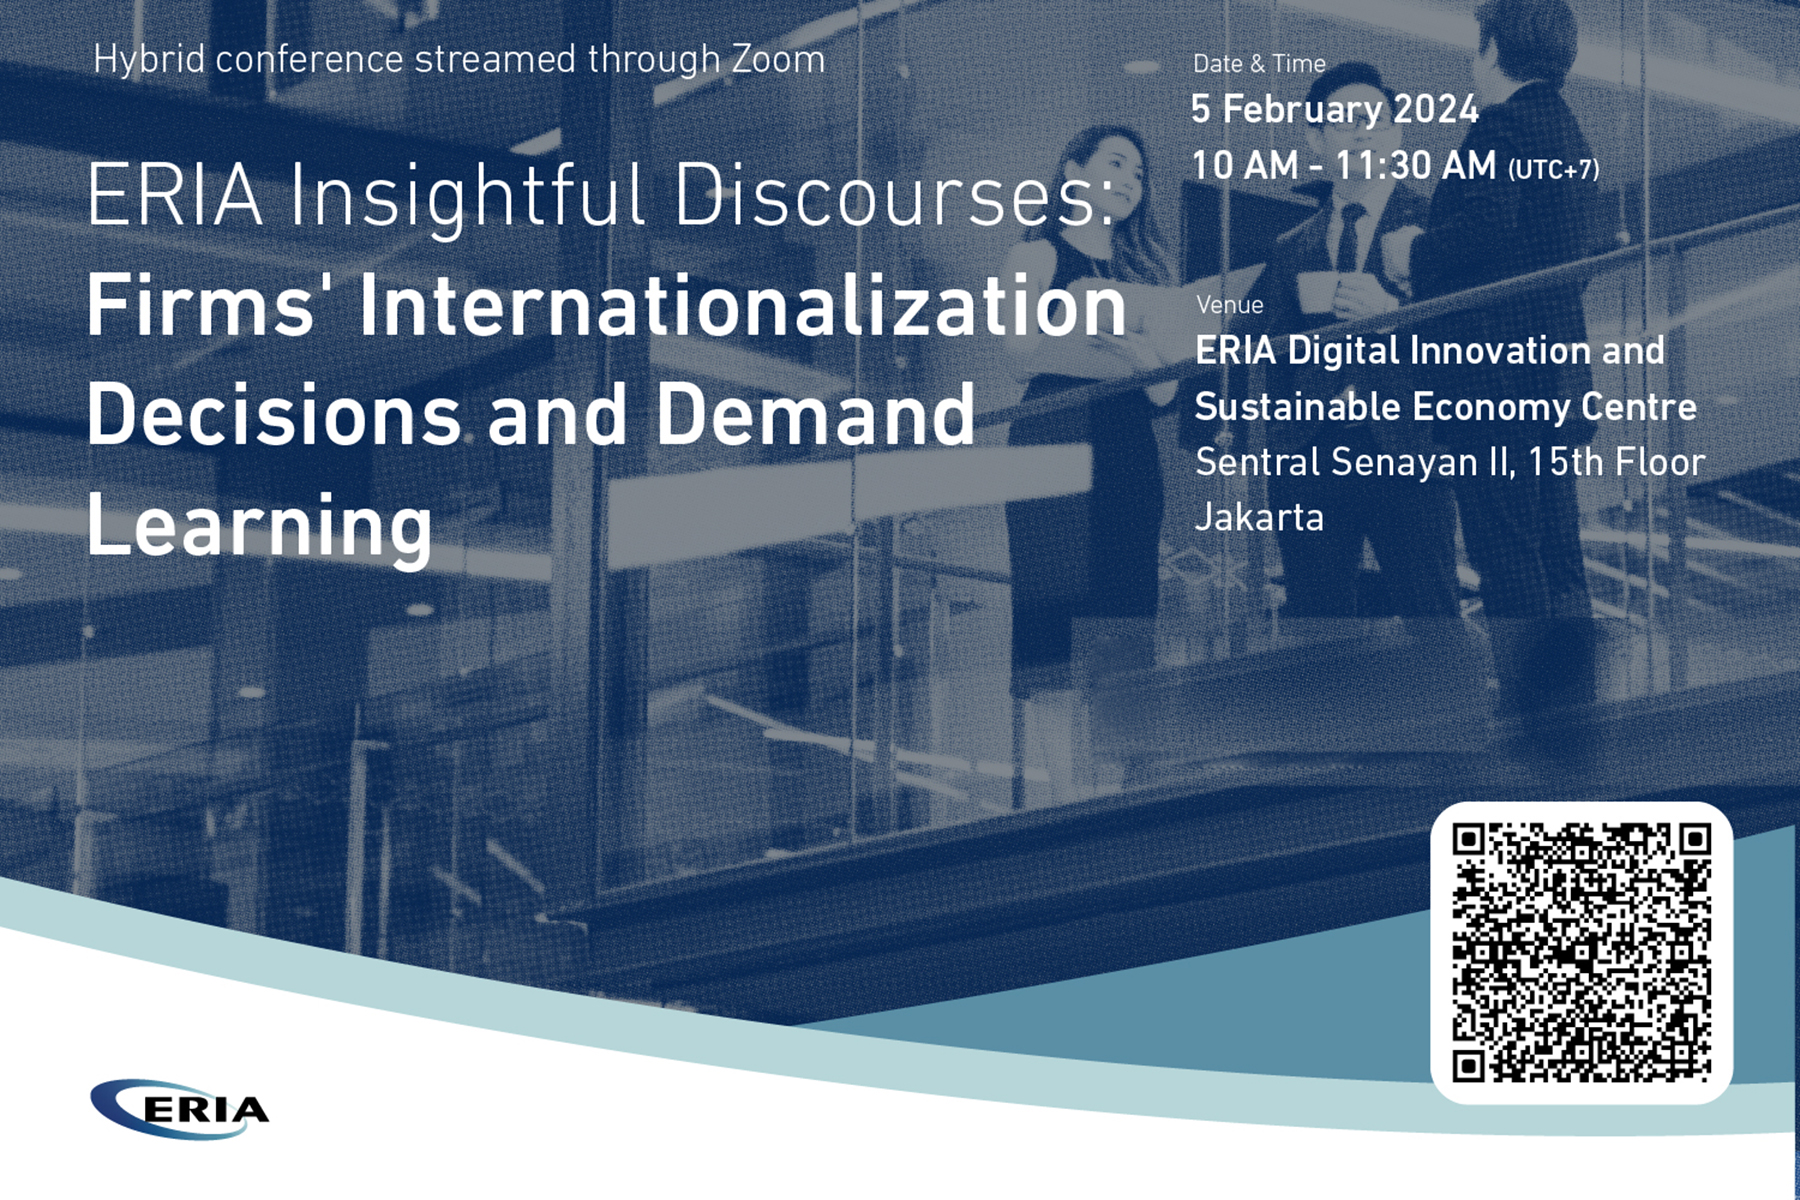 ERIA Insightful Discourses: Firms' Internationalization Decisions and Demand Learning